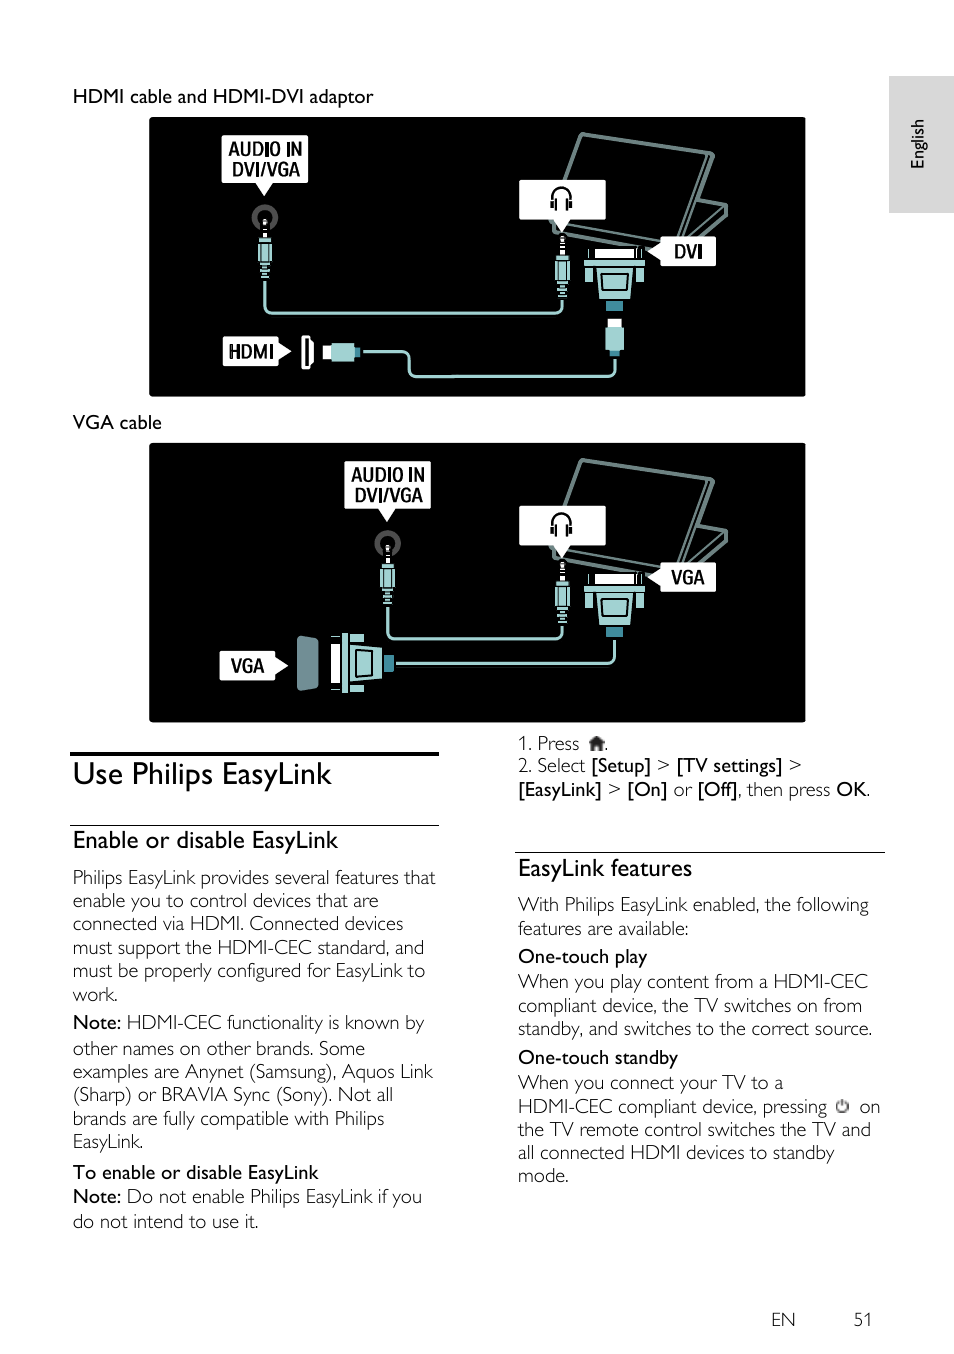 Use philips easylink, Enable or disable easylink, Easylink features |  Philips 46PFL5605H-12 User Manual | Page 51 / 65